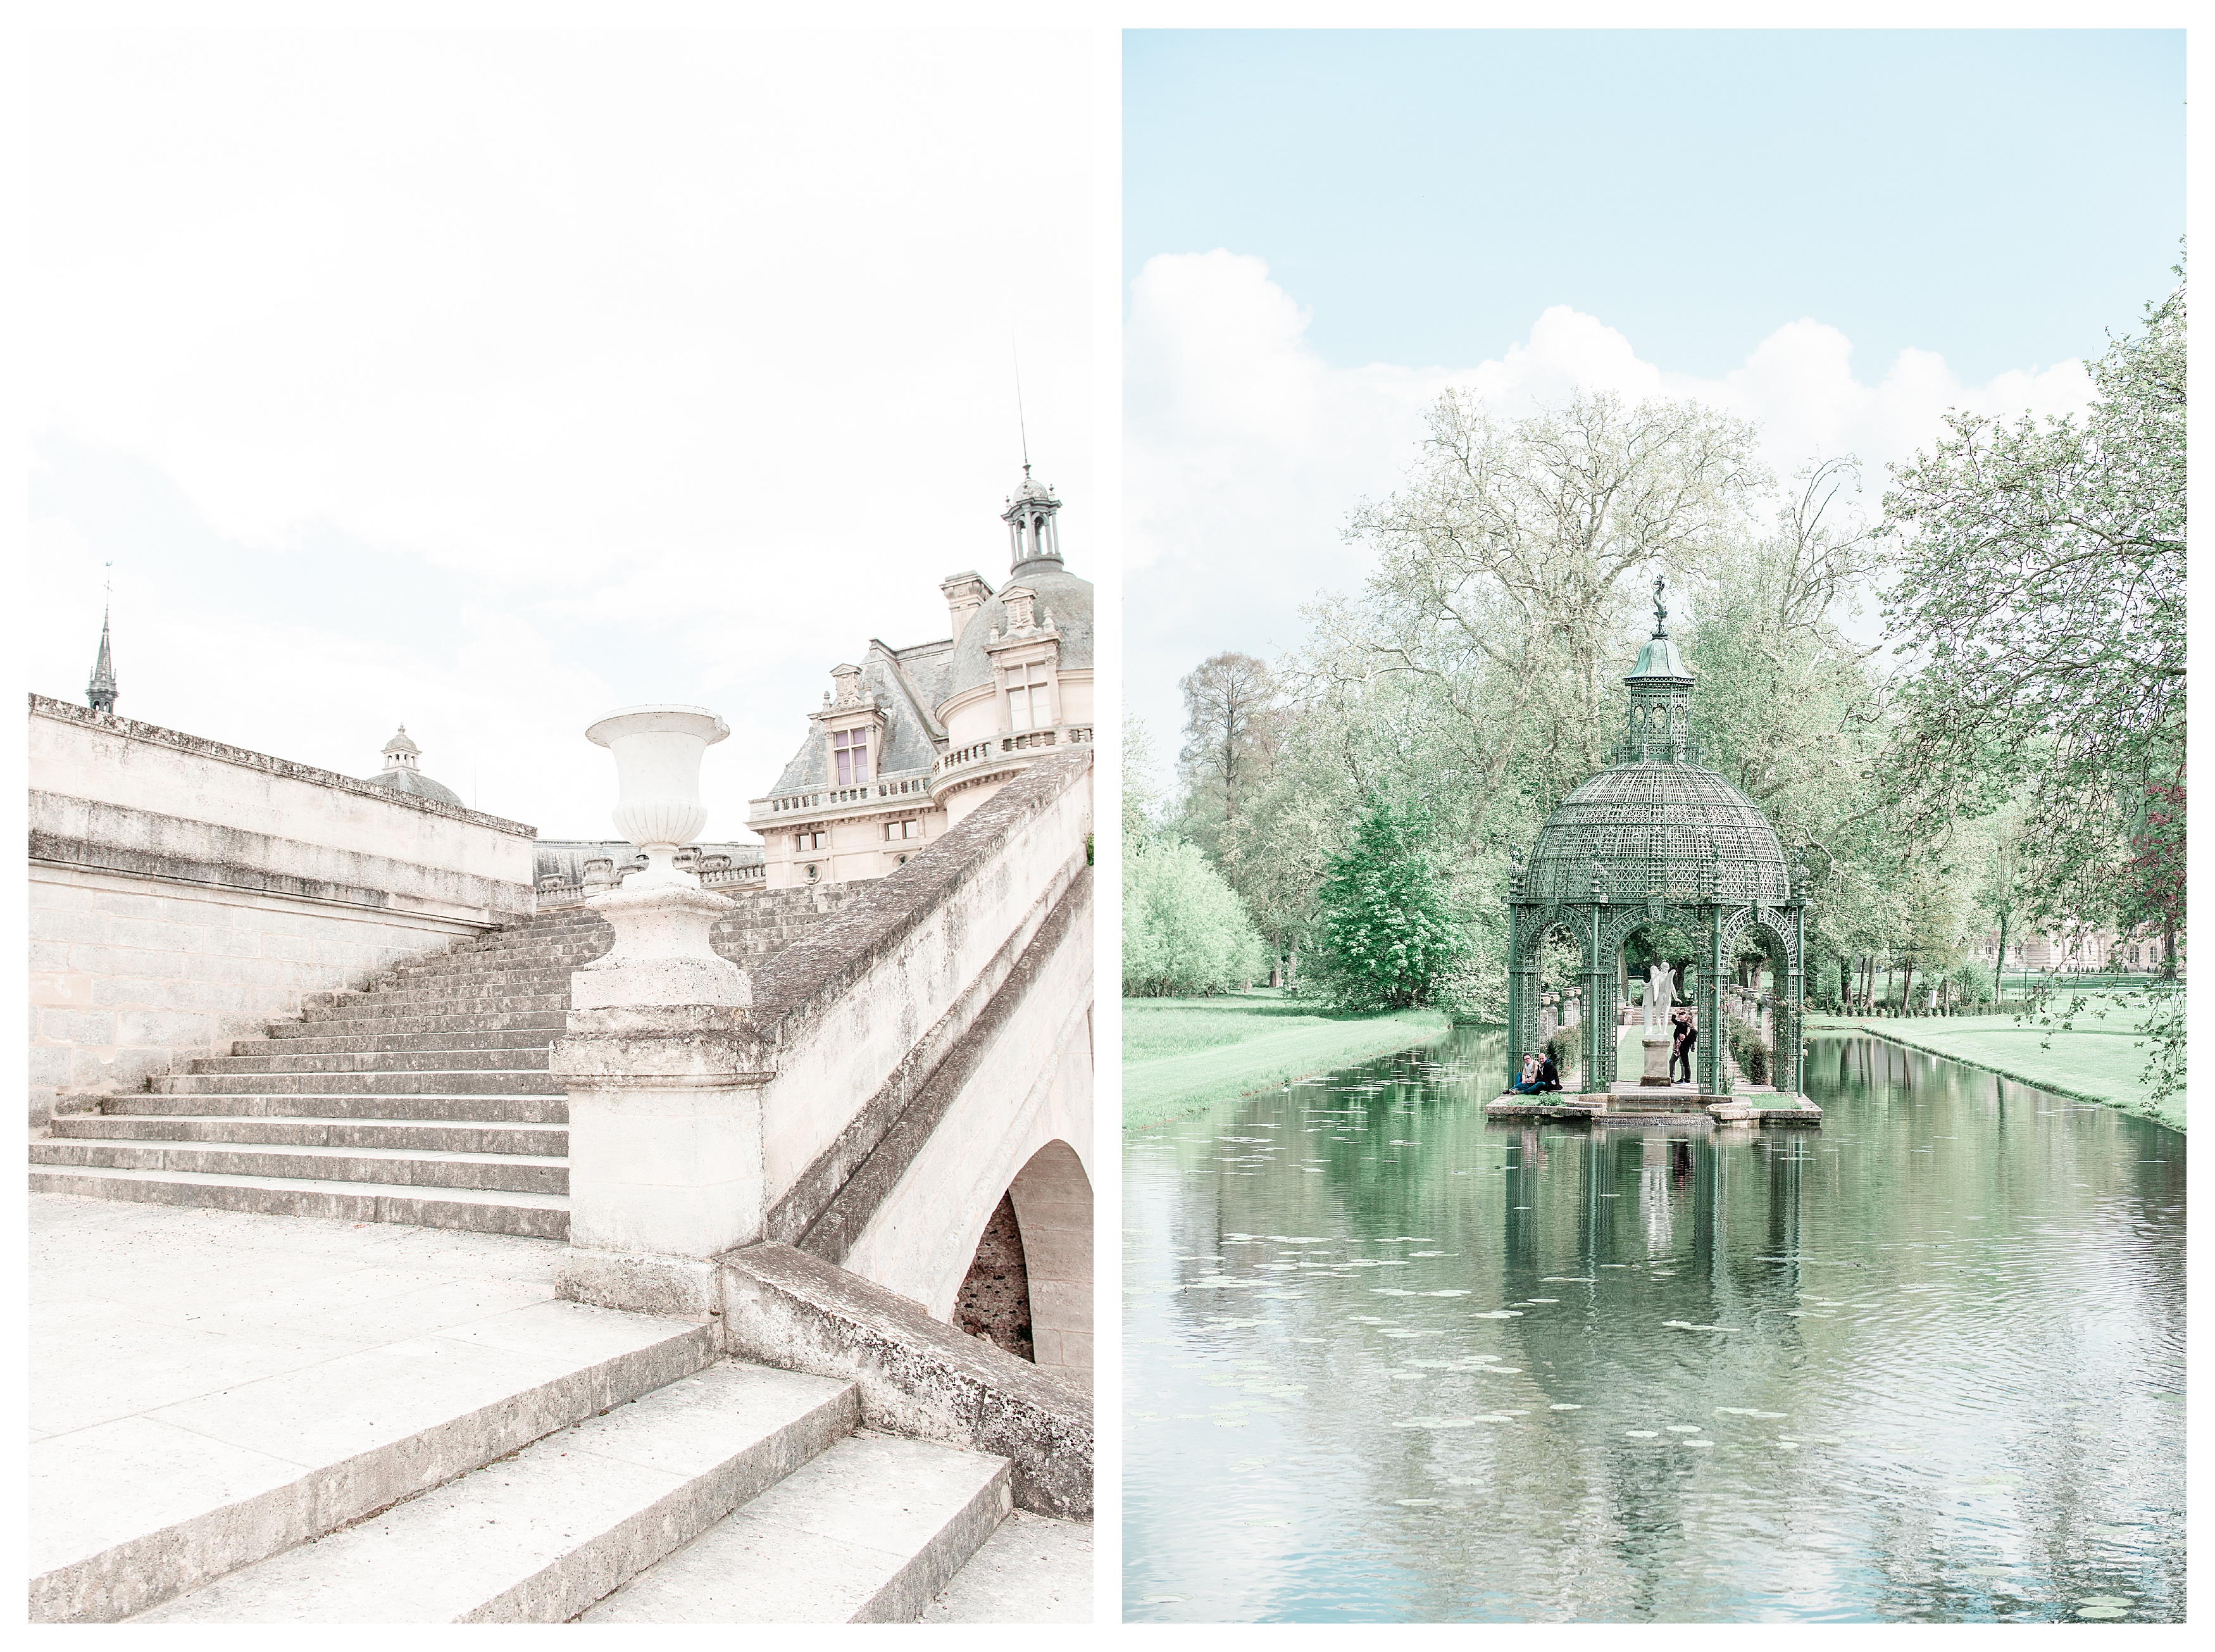 left: the stairs at the château de chantilly right: a pavilion in the middle of a canal in the gardens.